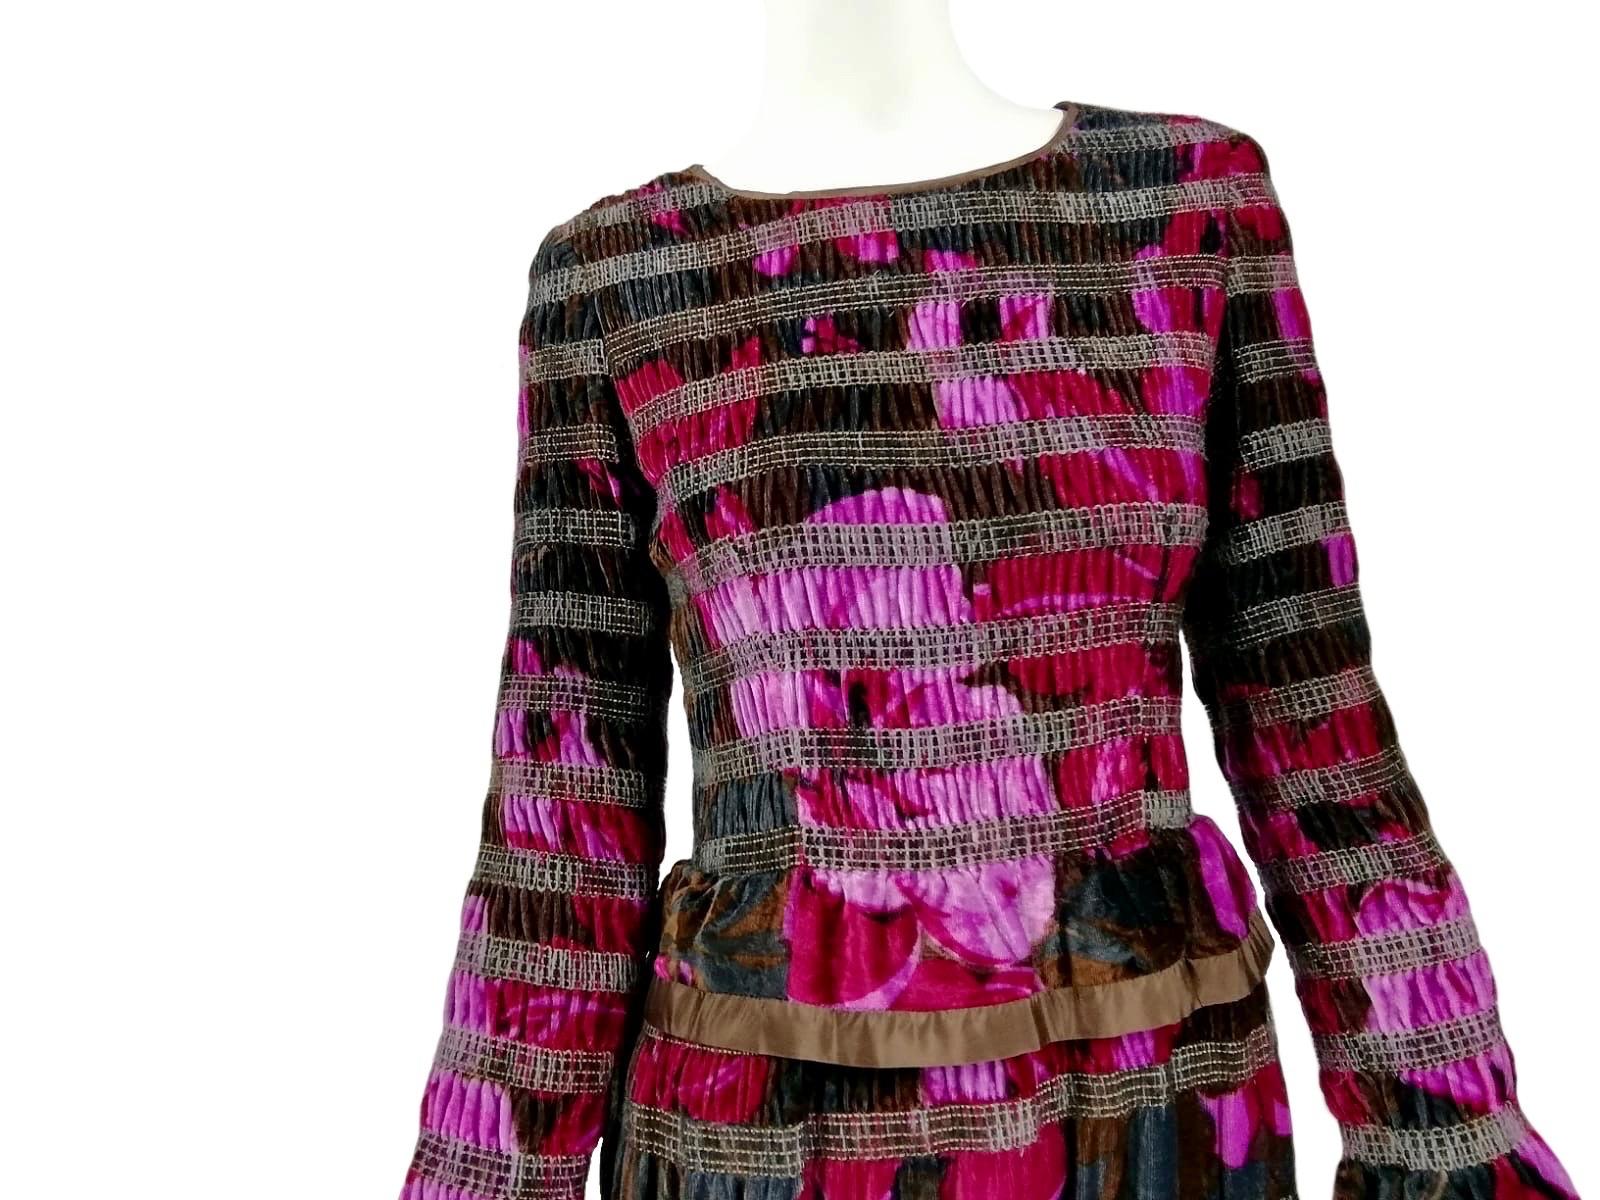 LANVIN 22. Faubourg St. Honoré _ PARIS 60s/70s
Long printed velvet dress  with large shocking pink and ruby red roses on a brown and gray background
Round neck, basque around the waist. Long sleeves with a slight frill at the end.
The very soft and